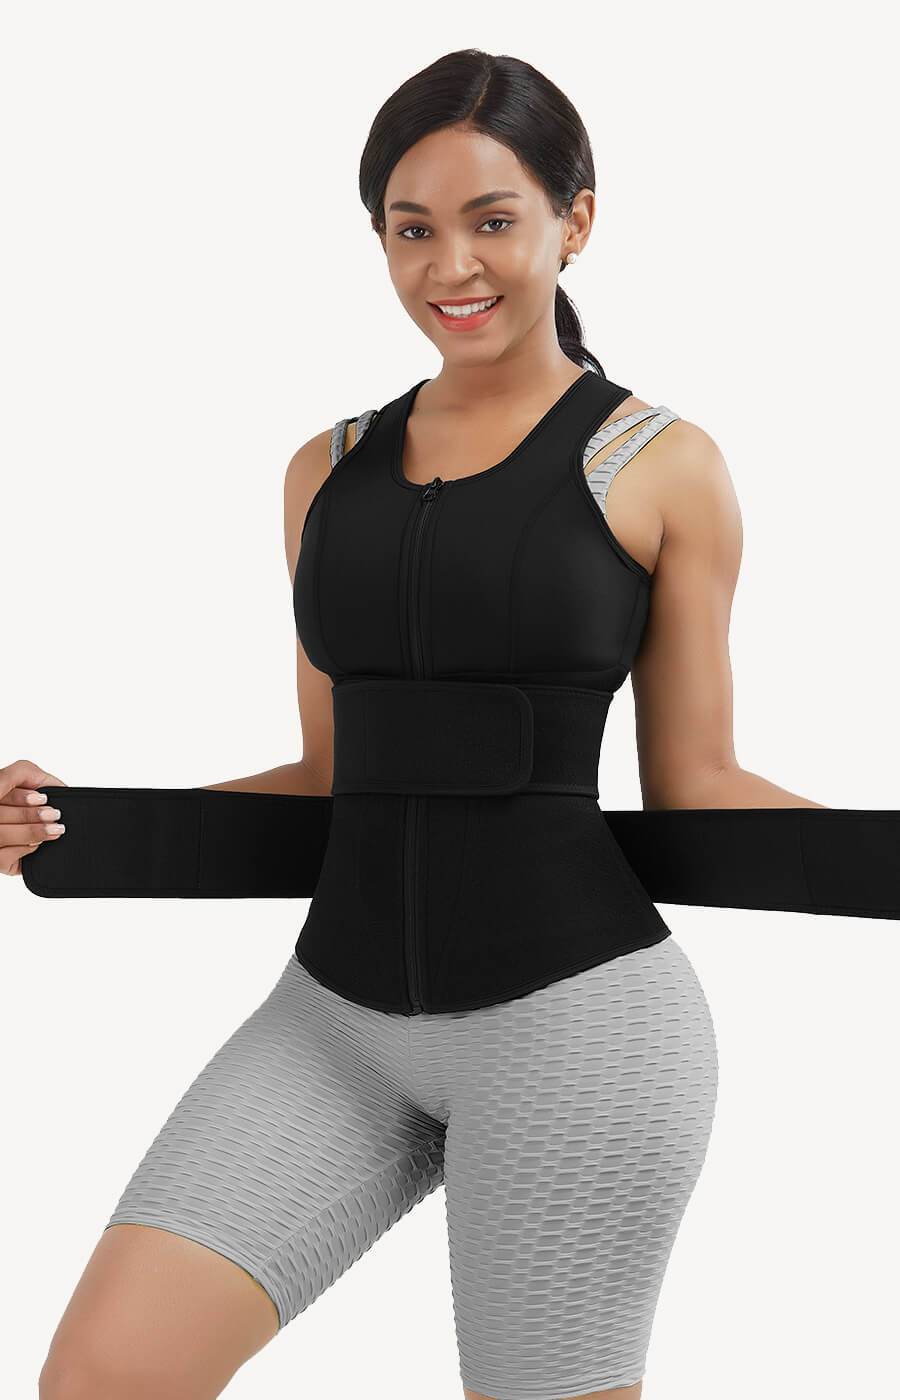 The Best Workout Waist Trainer for Women Who Want Result - Fashion Dresses